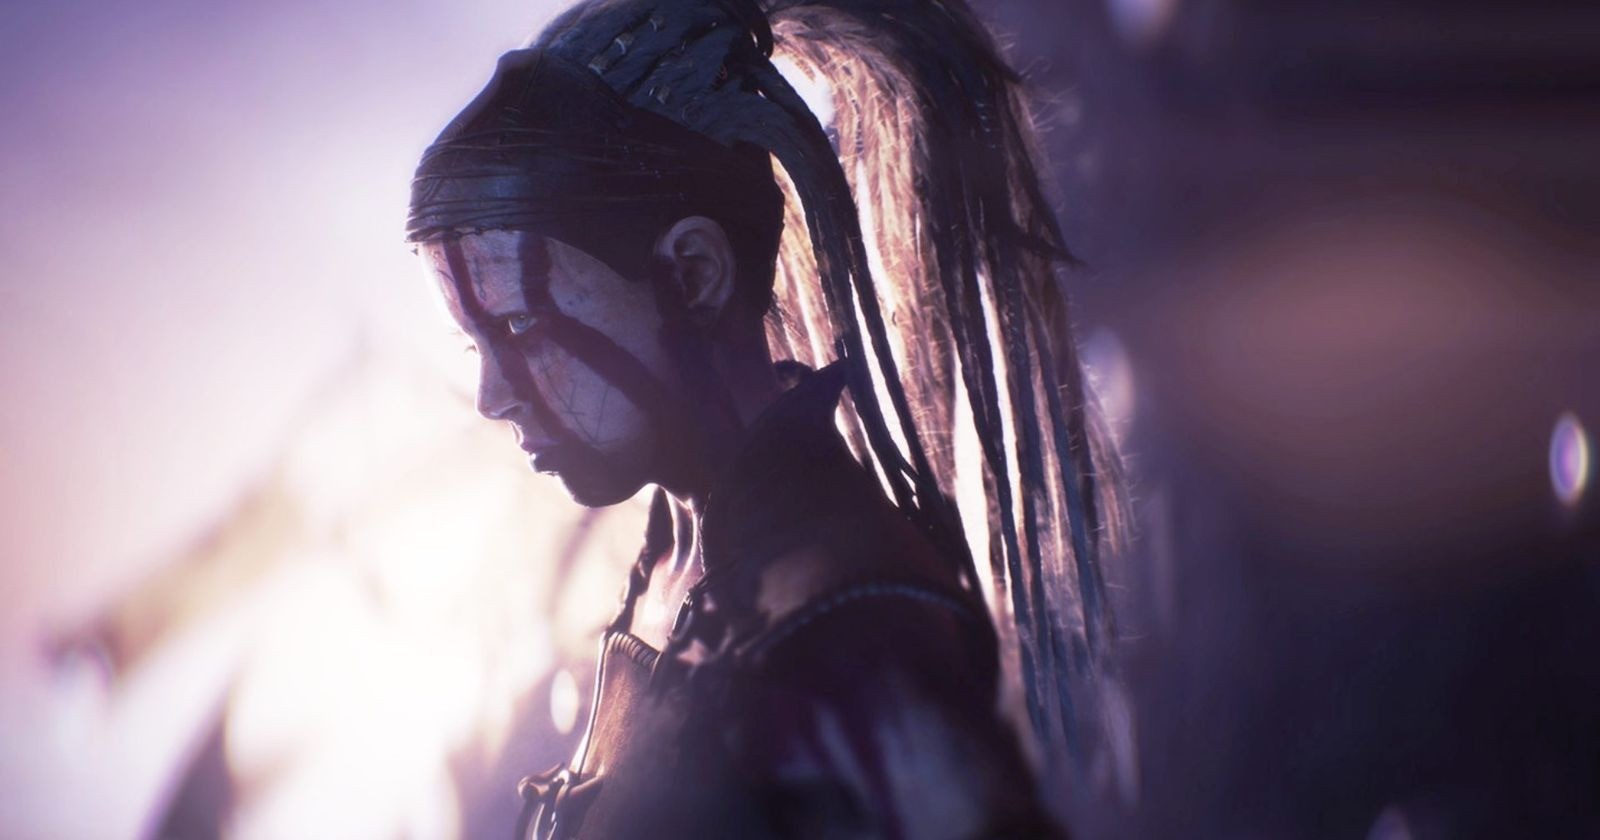 Senua suffers from psychosis in the Hellblade 